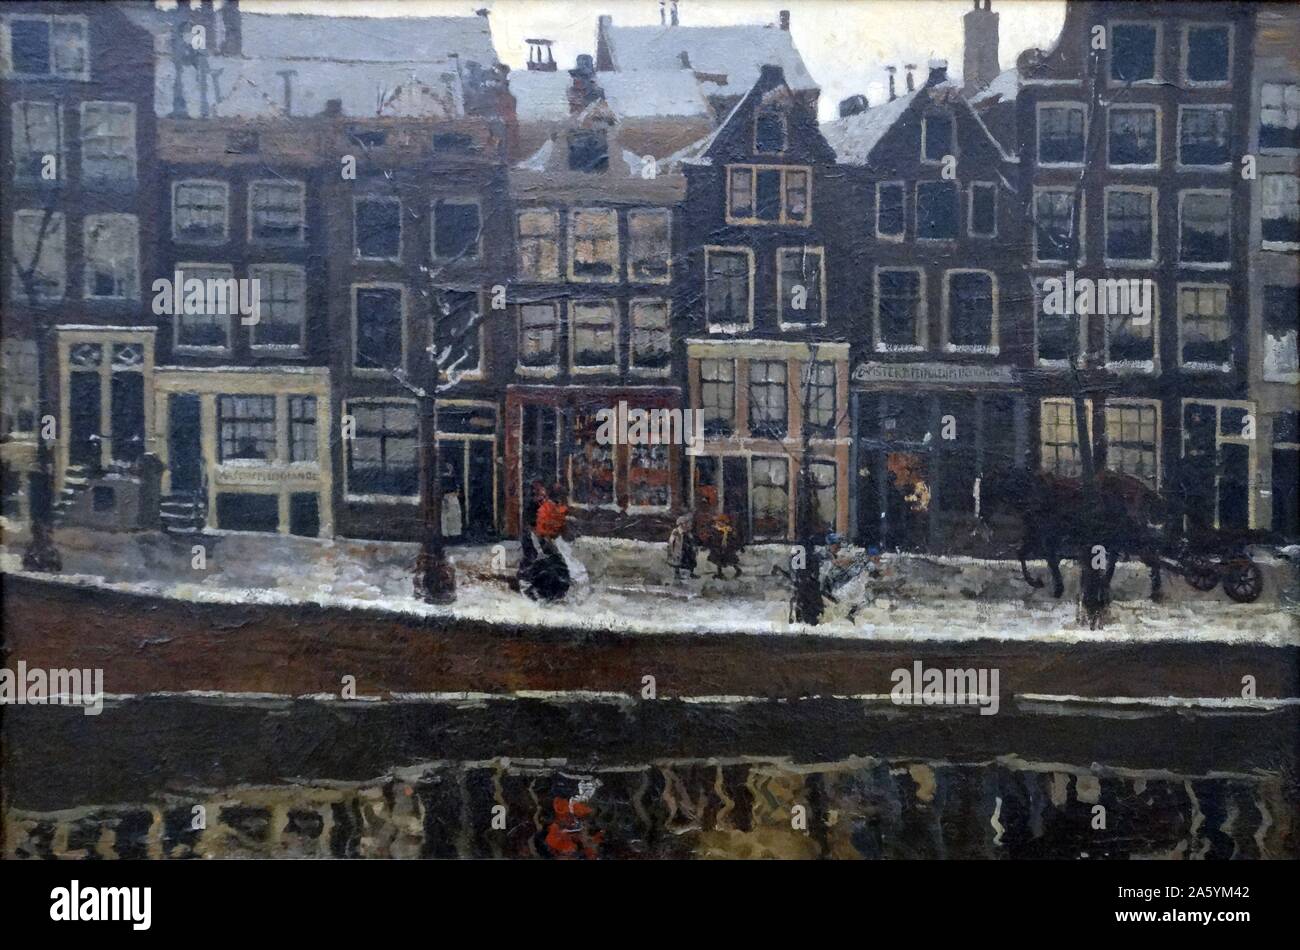 Lauriergracht, Amsterdam by George Hendrik Breitner (1857-1923) was a Dutch painter and photographer. An important figure in Amsterdam Impressionism, he is noted especially for his paintings of street scenes and harbours in a realistic style. Stock Photo